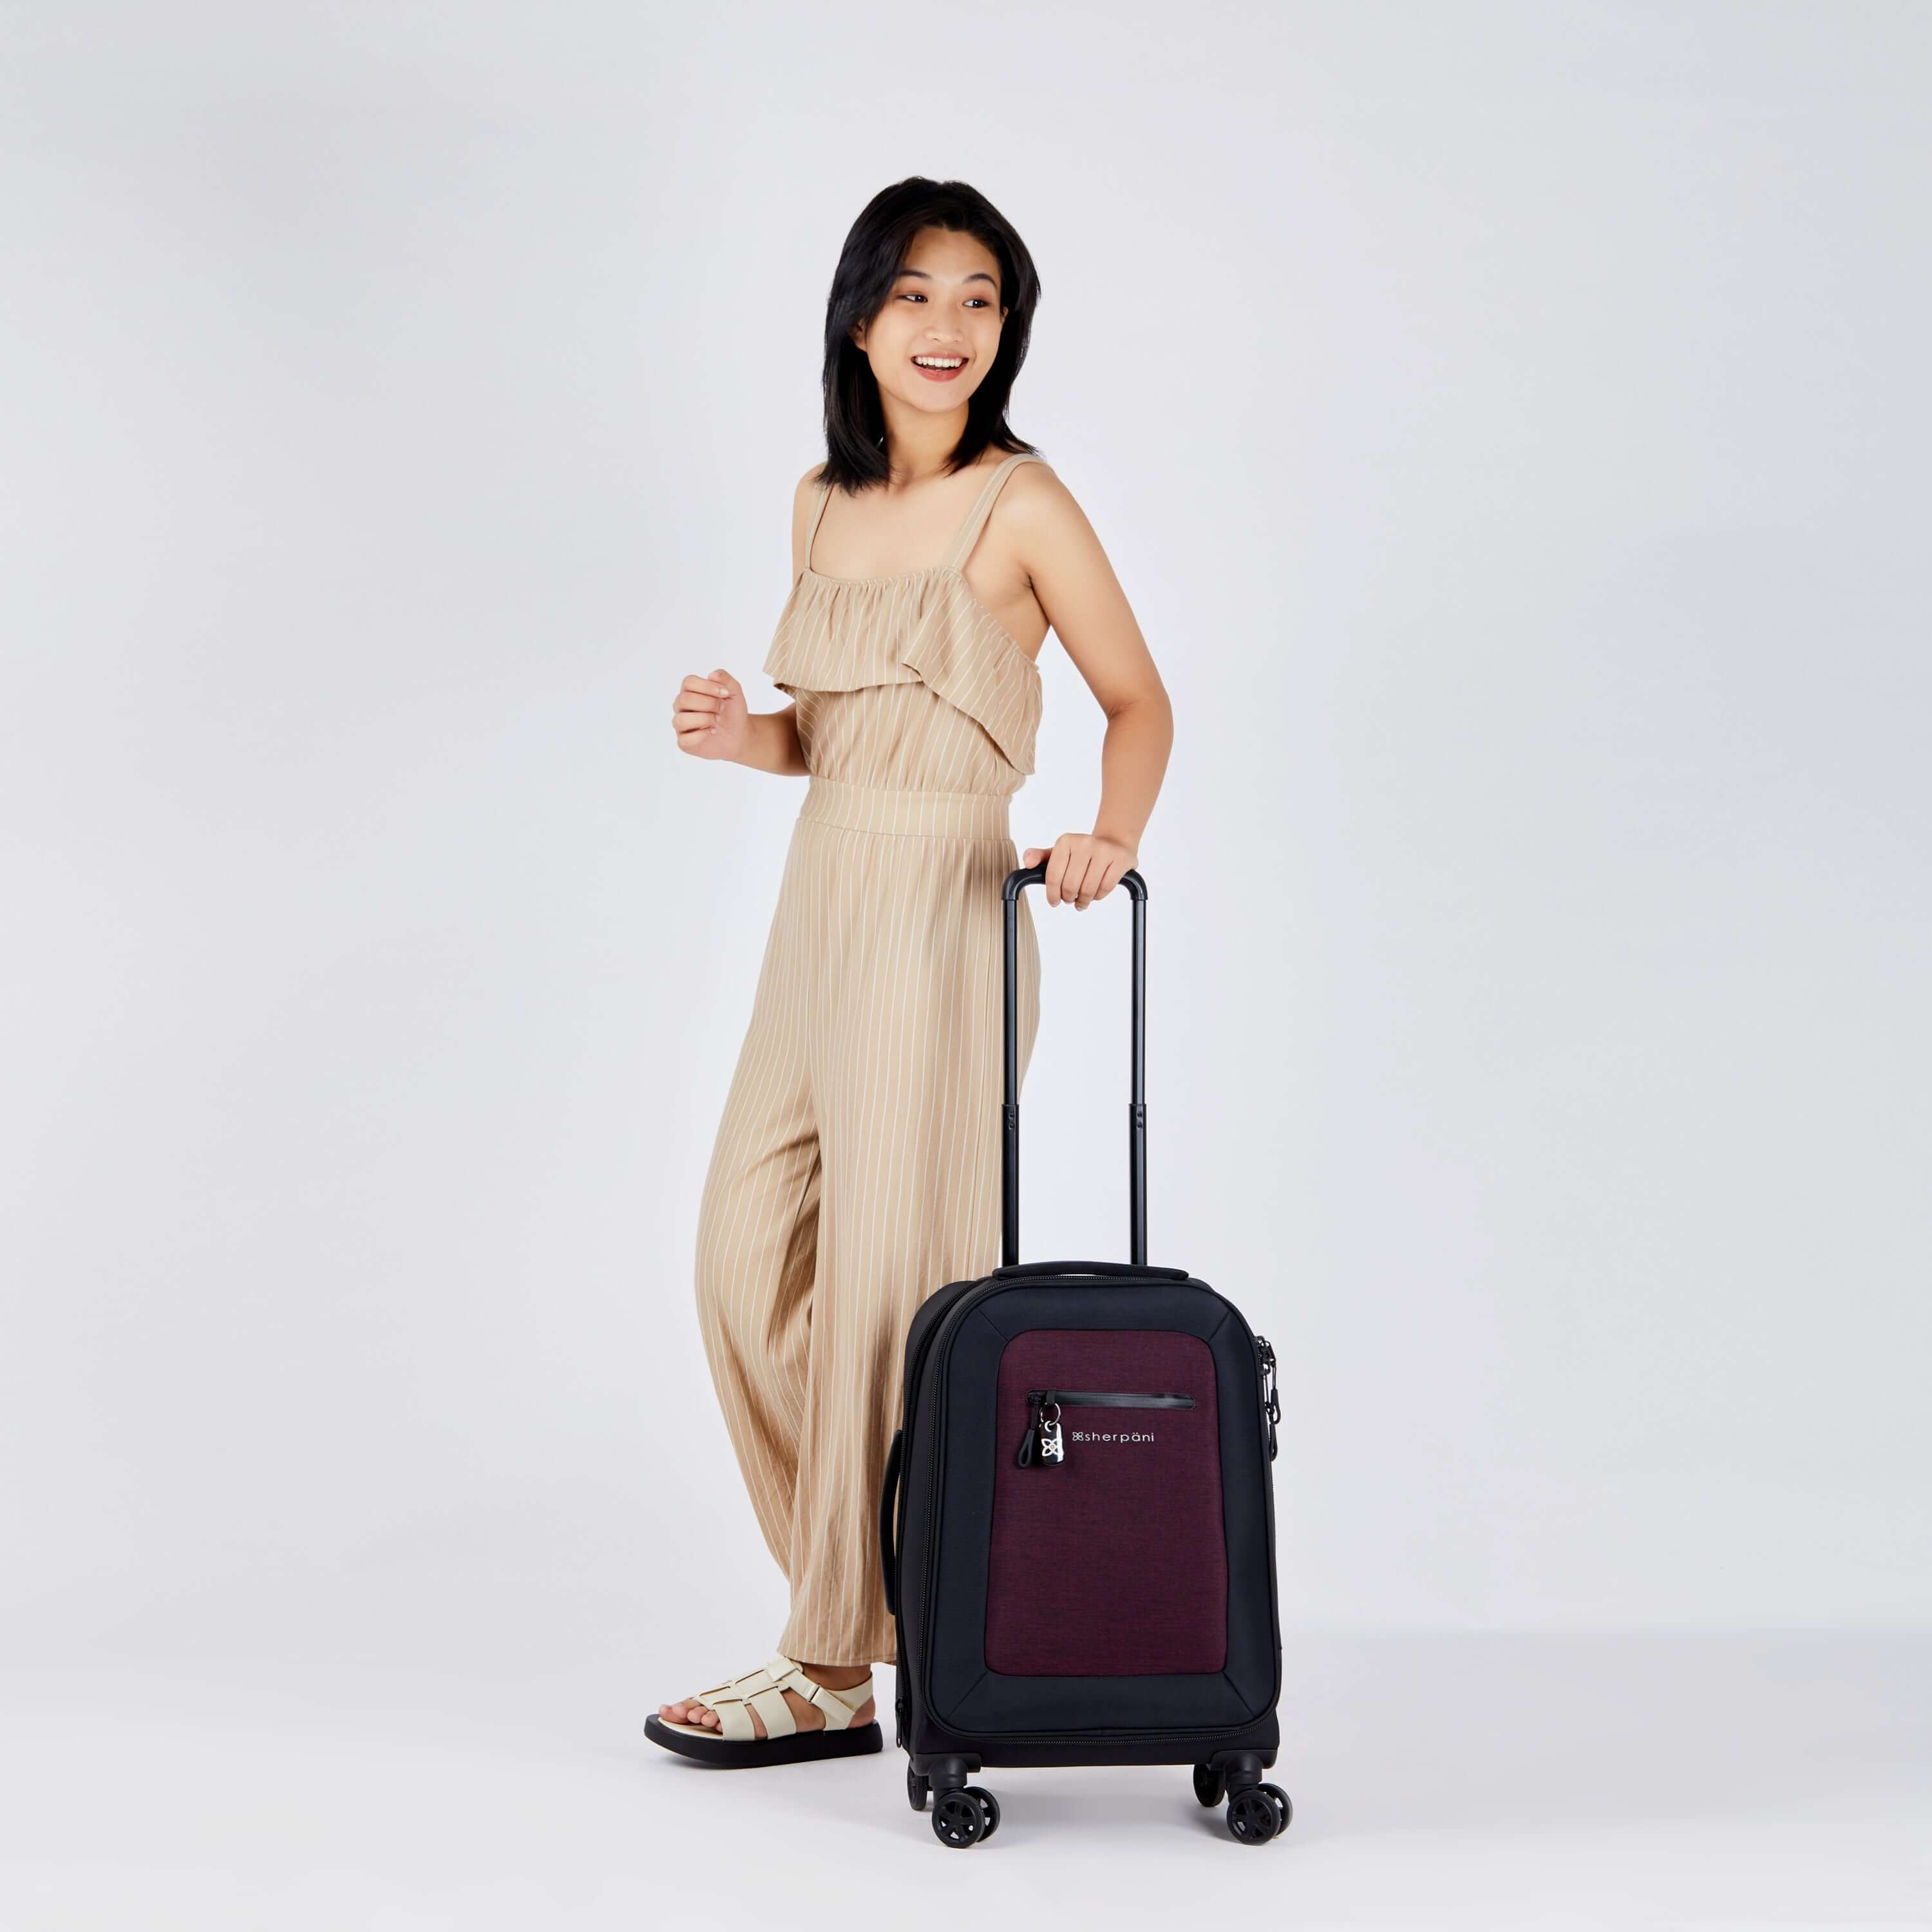 Full bodied view of a dark haired model facing to the side and smiling over her left shoulder. She is wearing a tan jumpsuit and sandals. Her left hand is holding the retractable luggage handle of Sherpani's Anti-Theft suitcase, the Latitude in Merlot. 